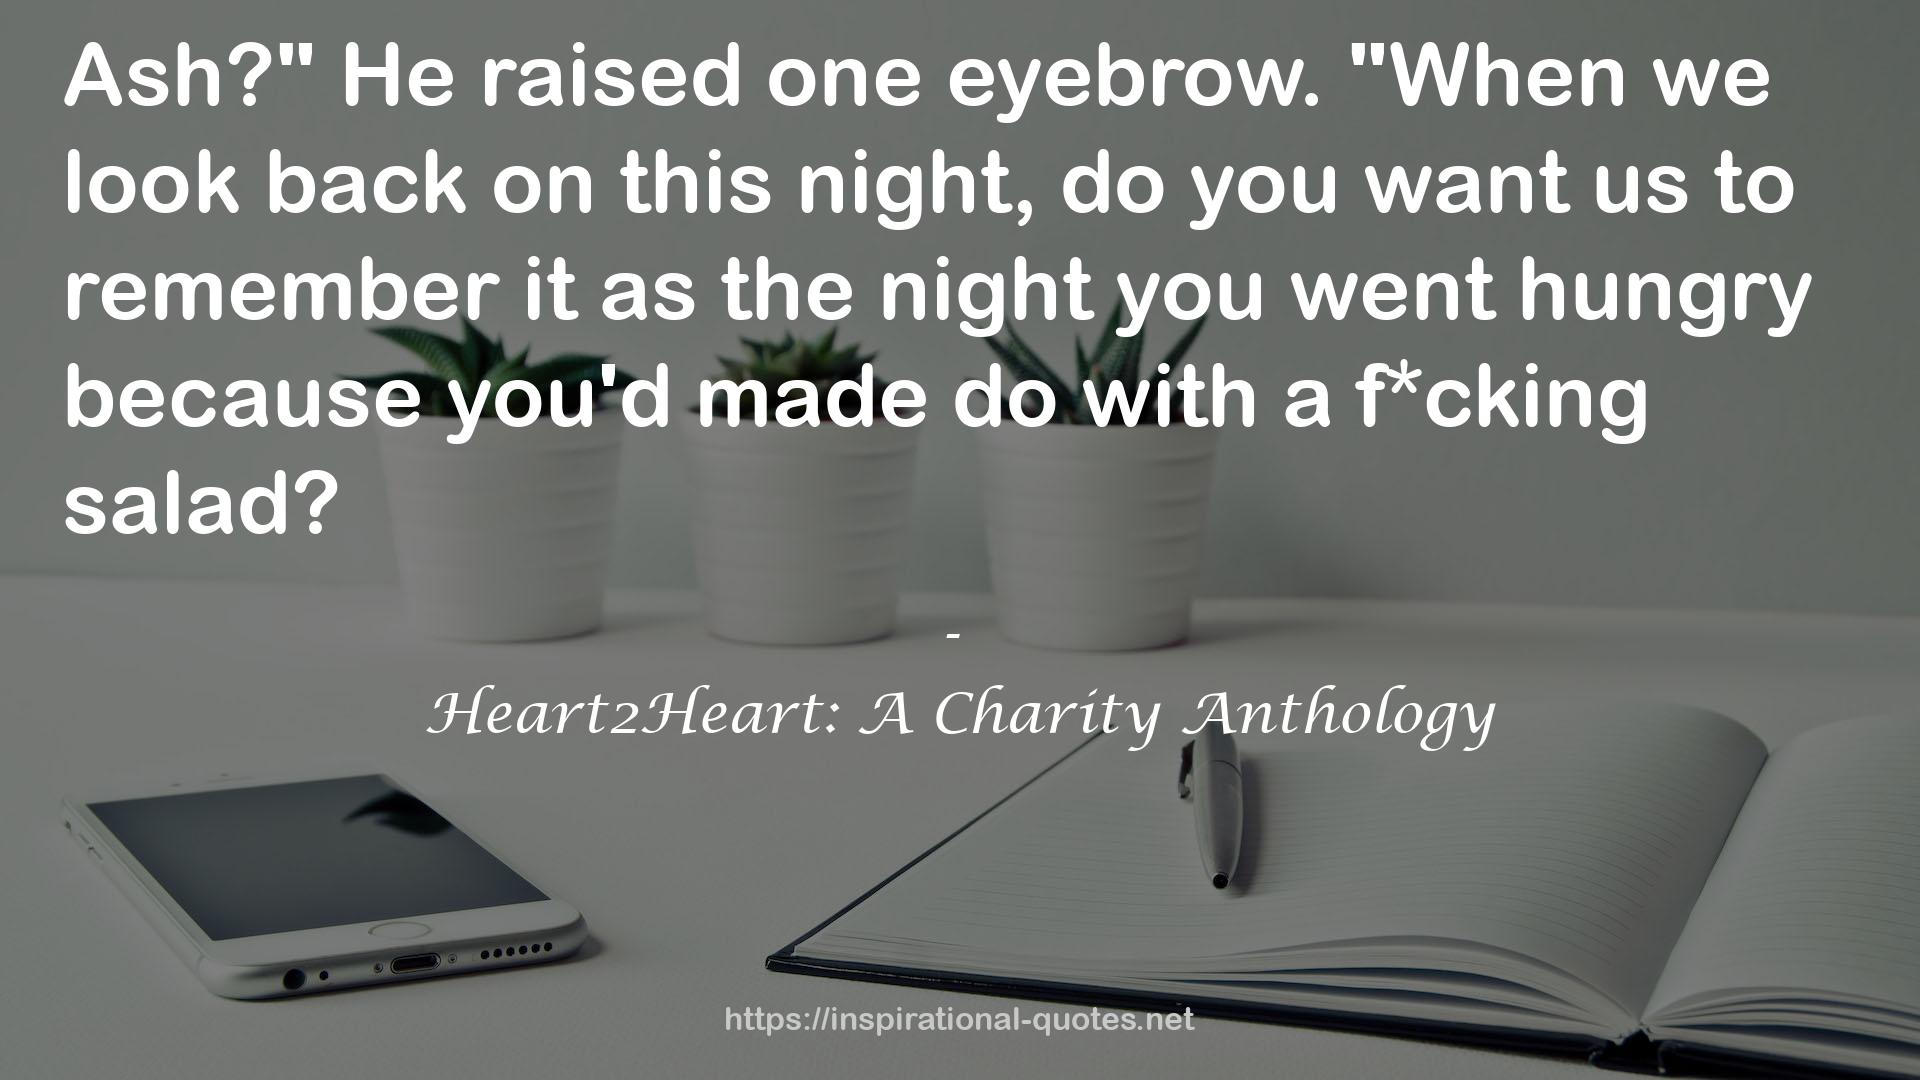 Heart2Heart: A Charity Anthology QUOTES